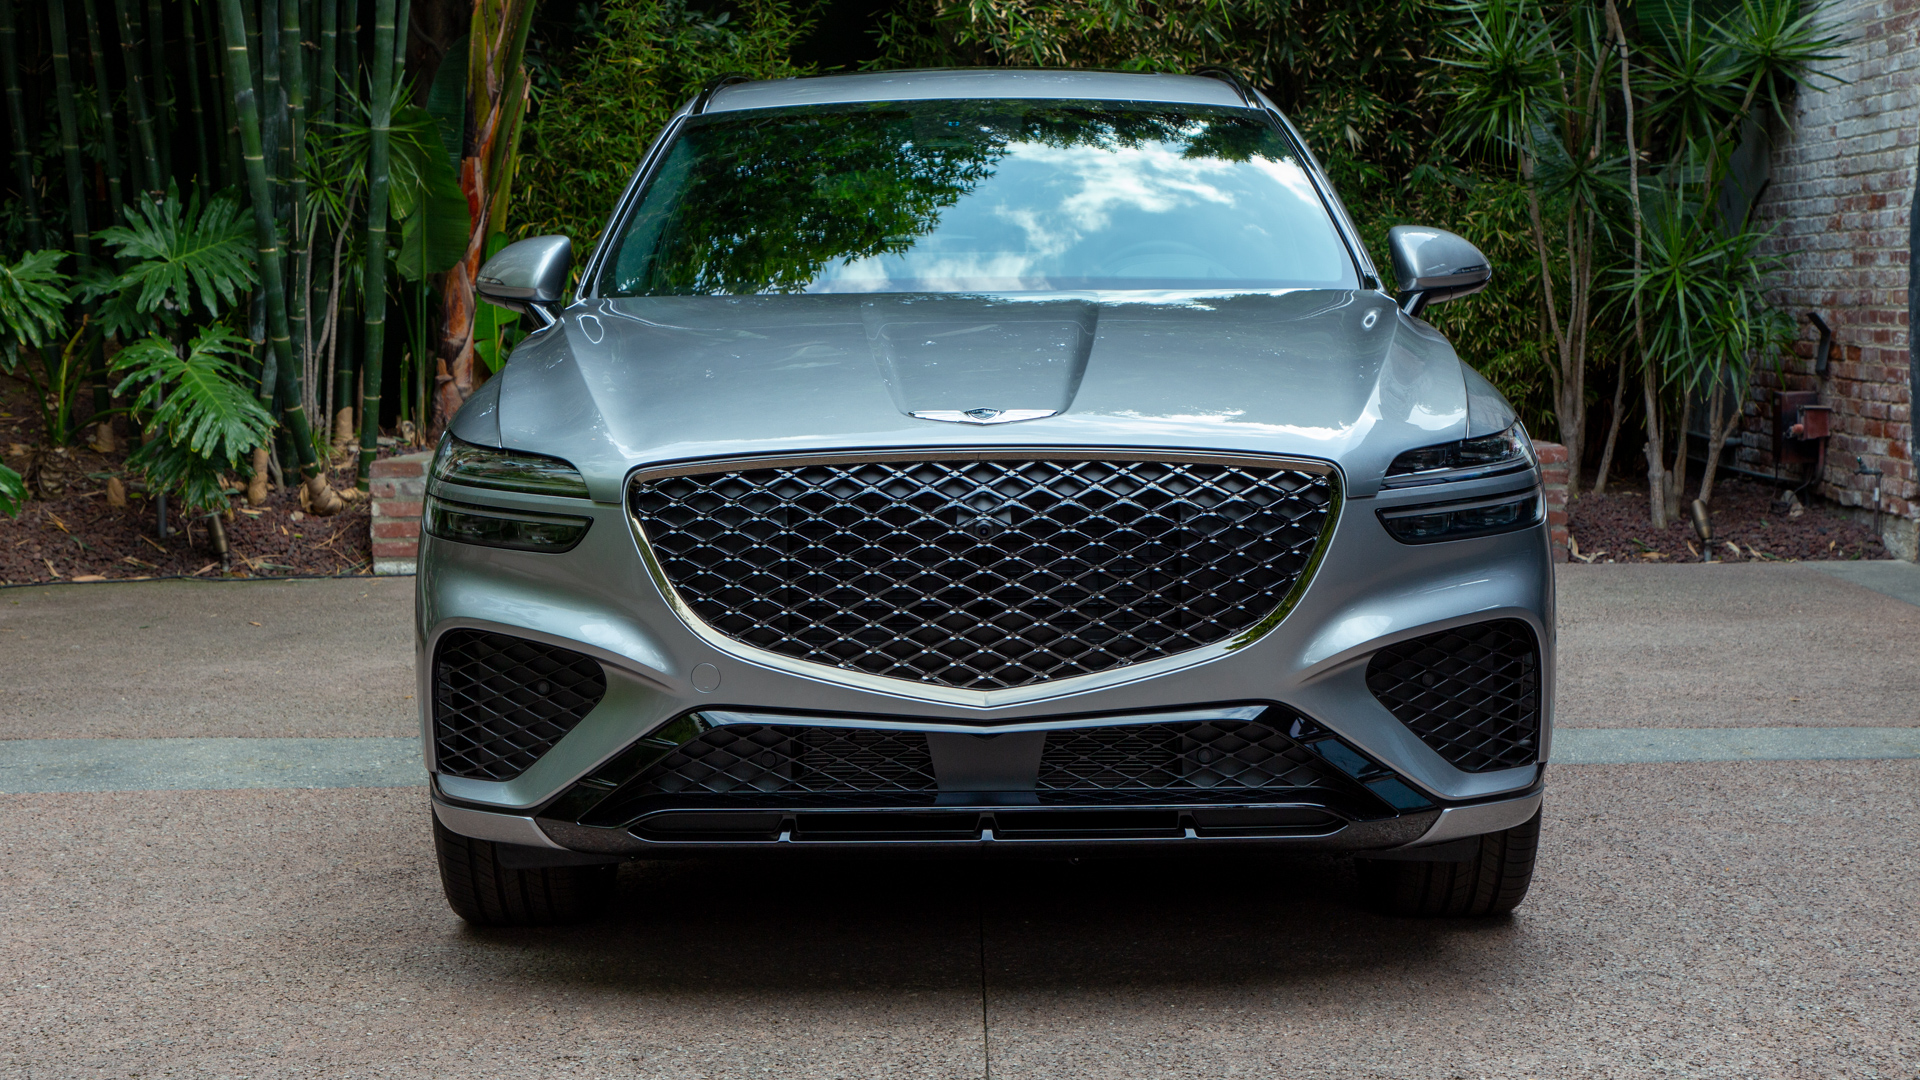 Preview 2022 Genesis Gv70 Looks To Add Sporty Flair To Gv80s Looks